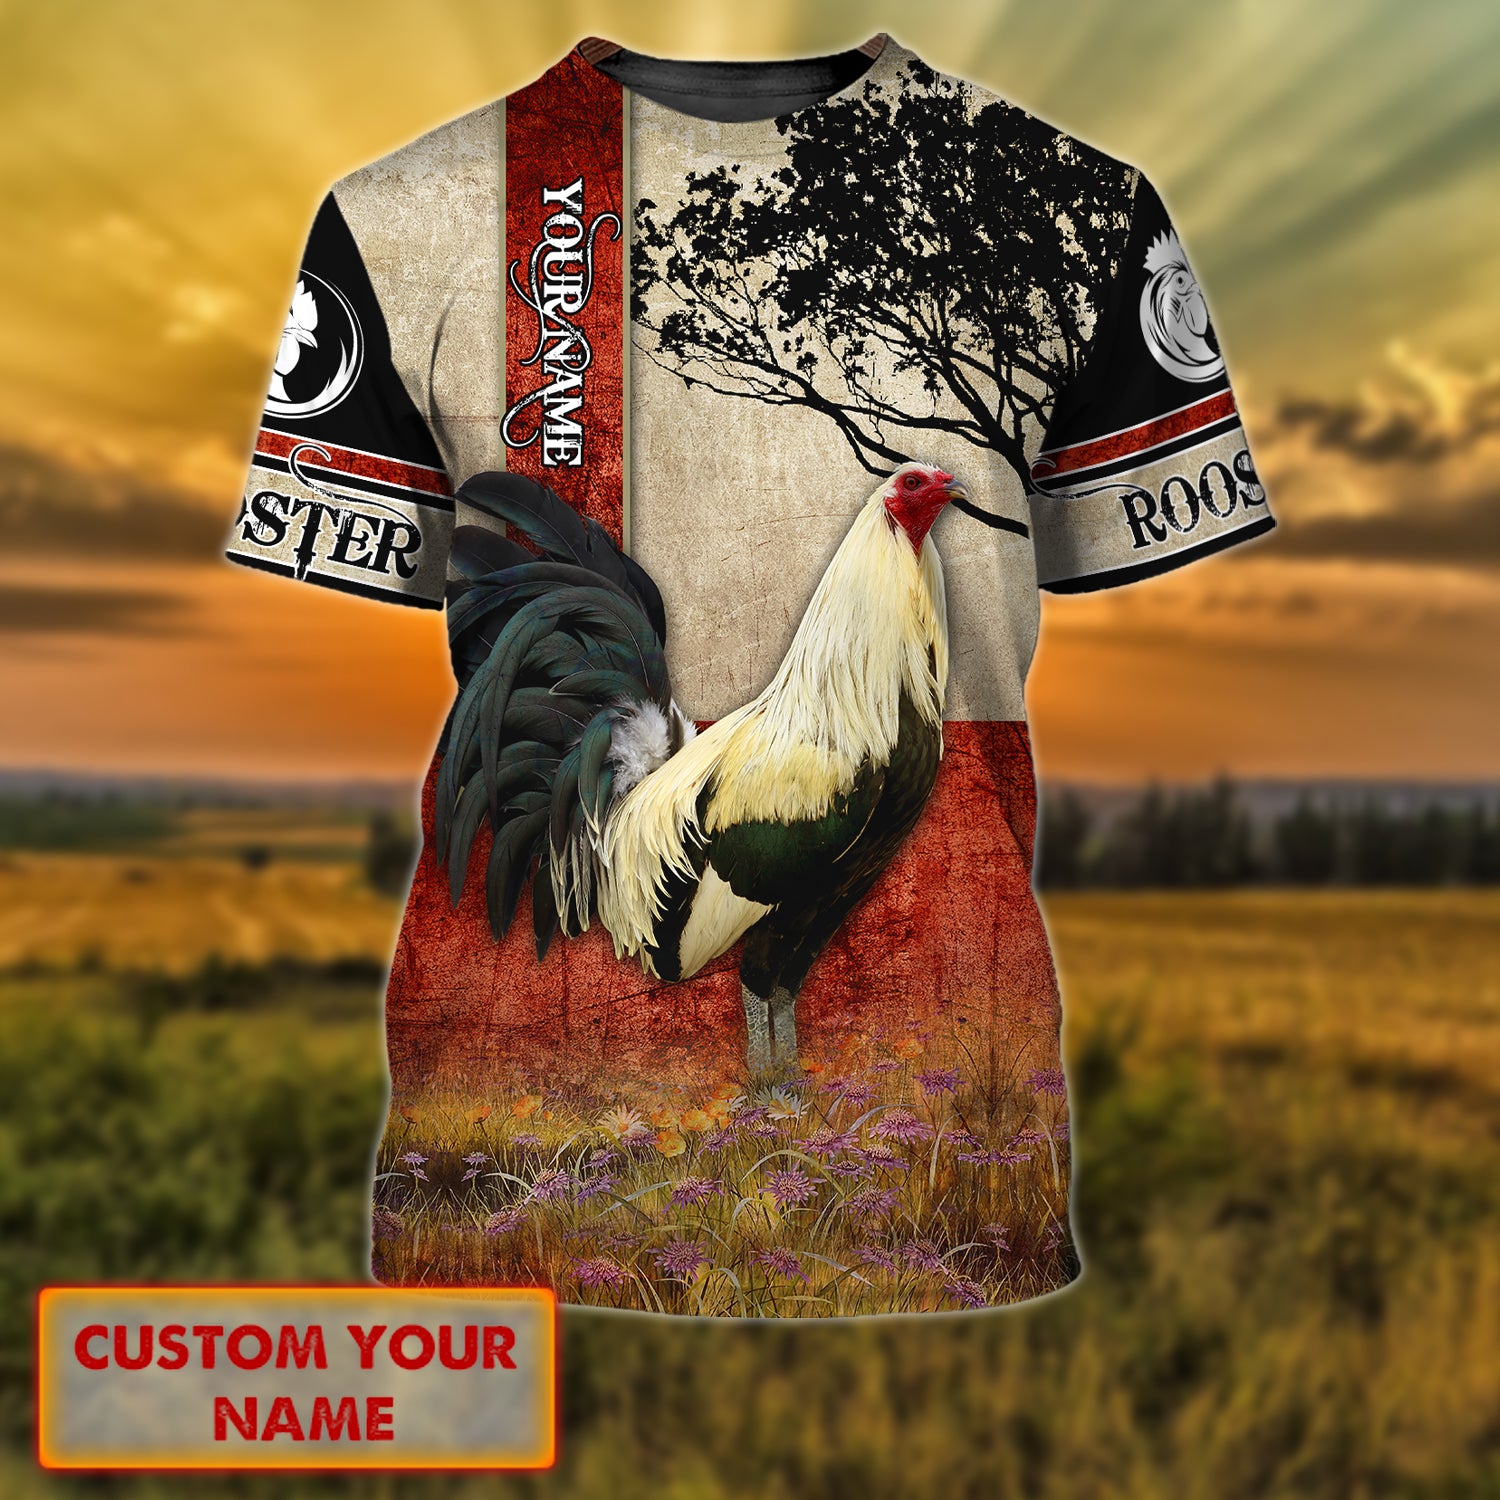 Rooster - Personalized Name 3D Tshirt 43 - Nvc97